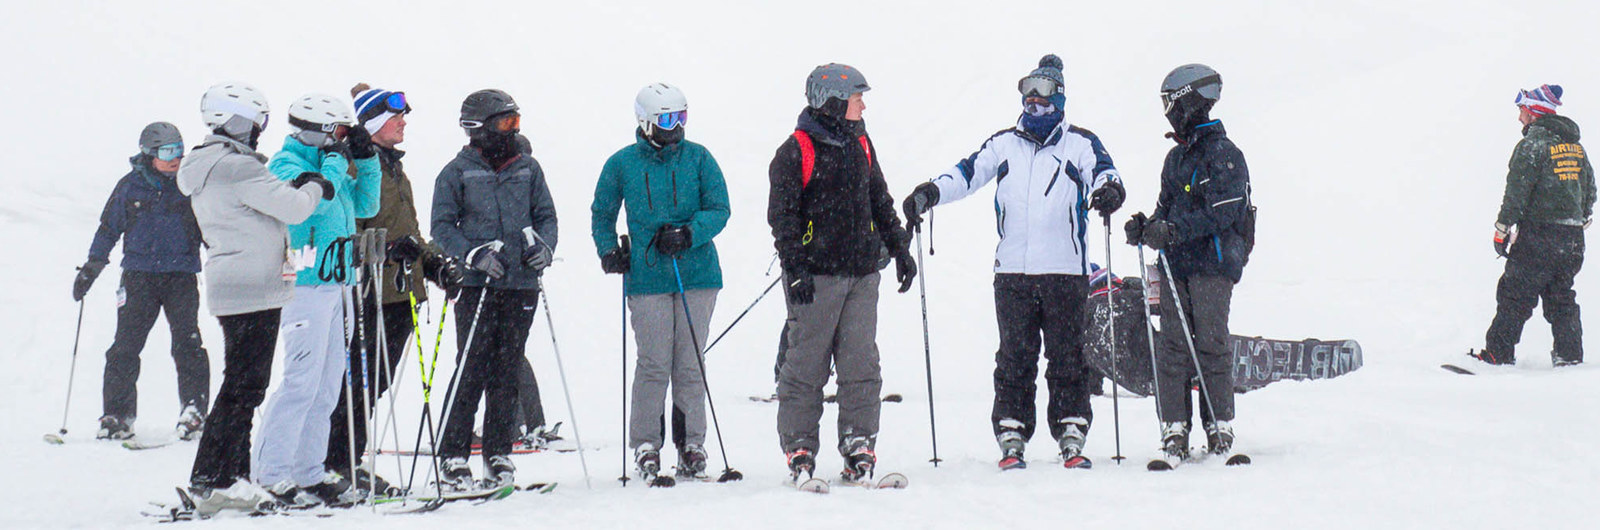 A group of skiers standing at the bottom of a hill.